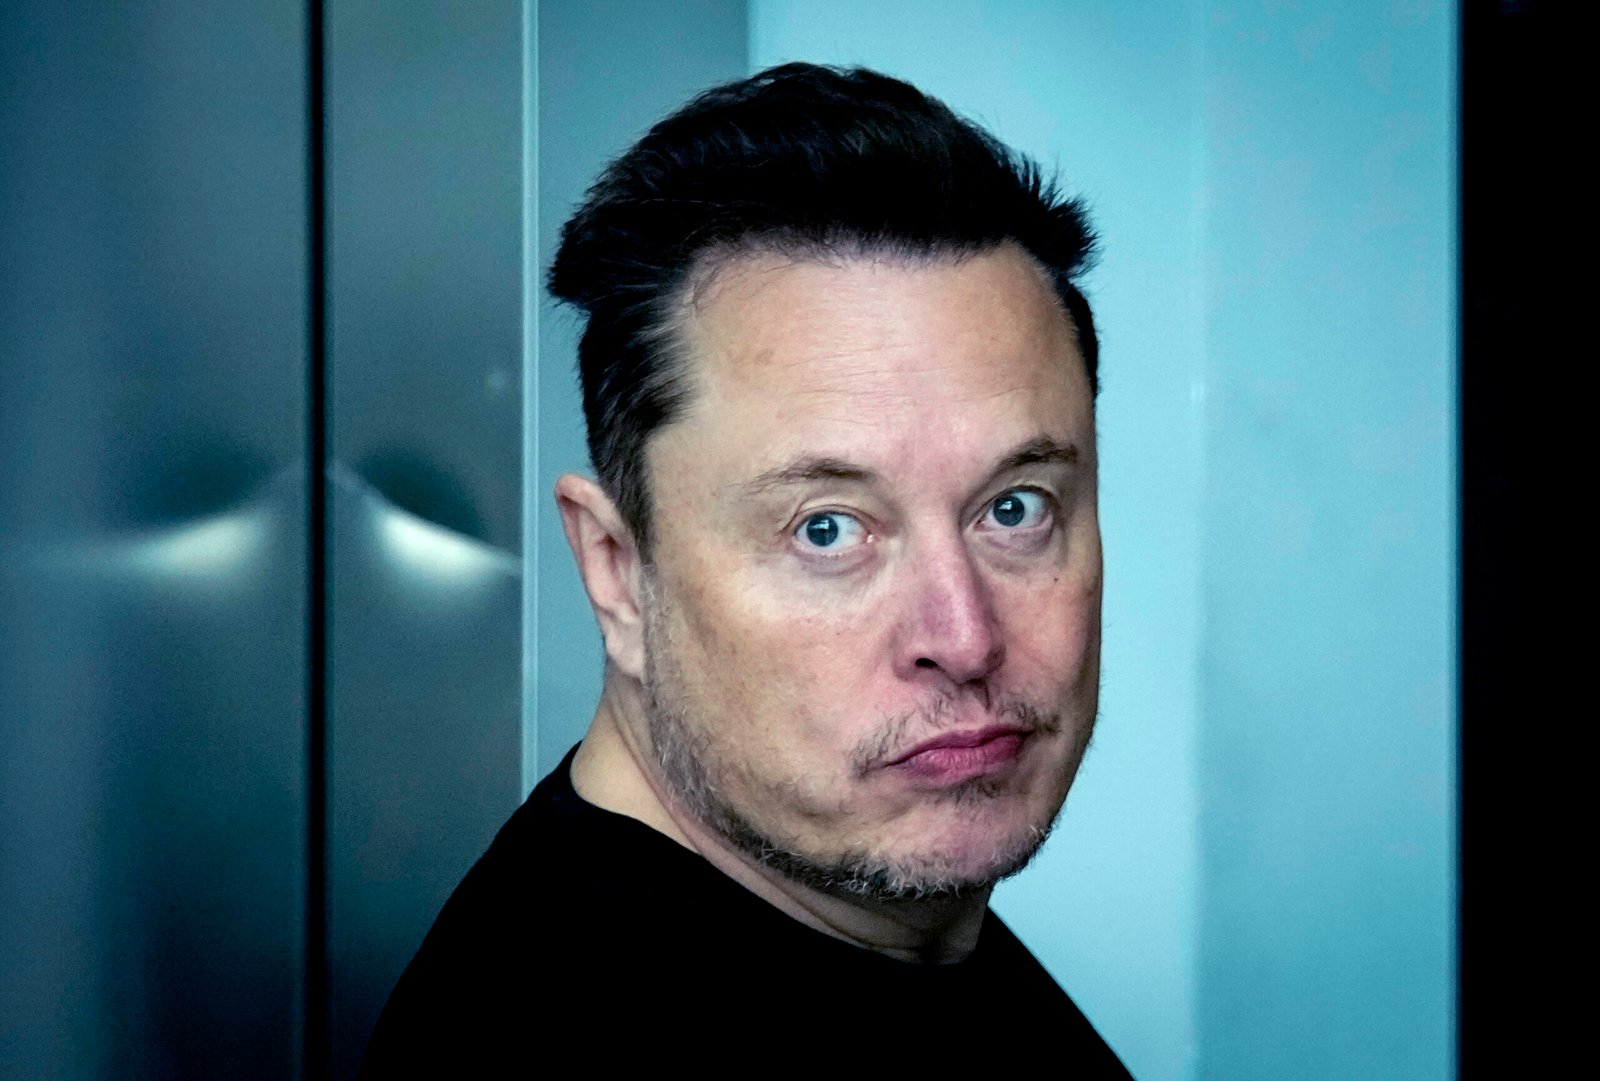 Future of Elon Musk and Tesla on the line this week